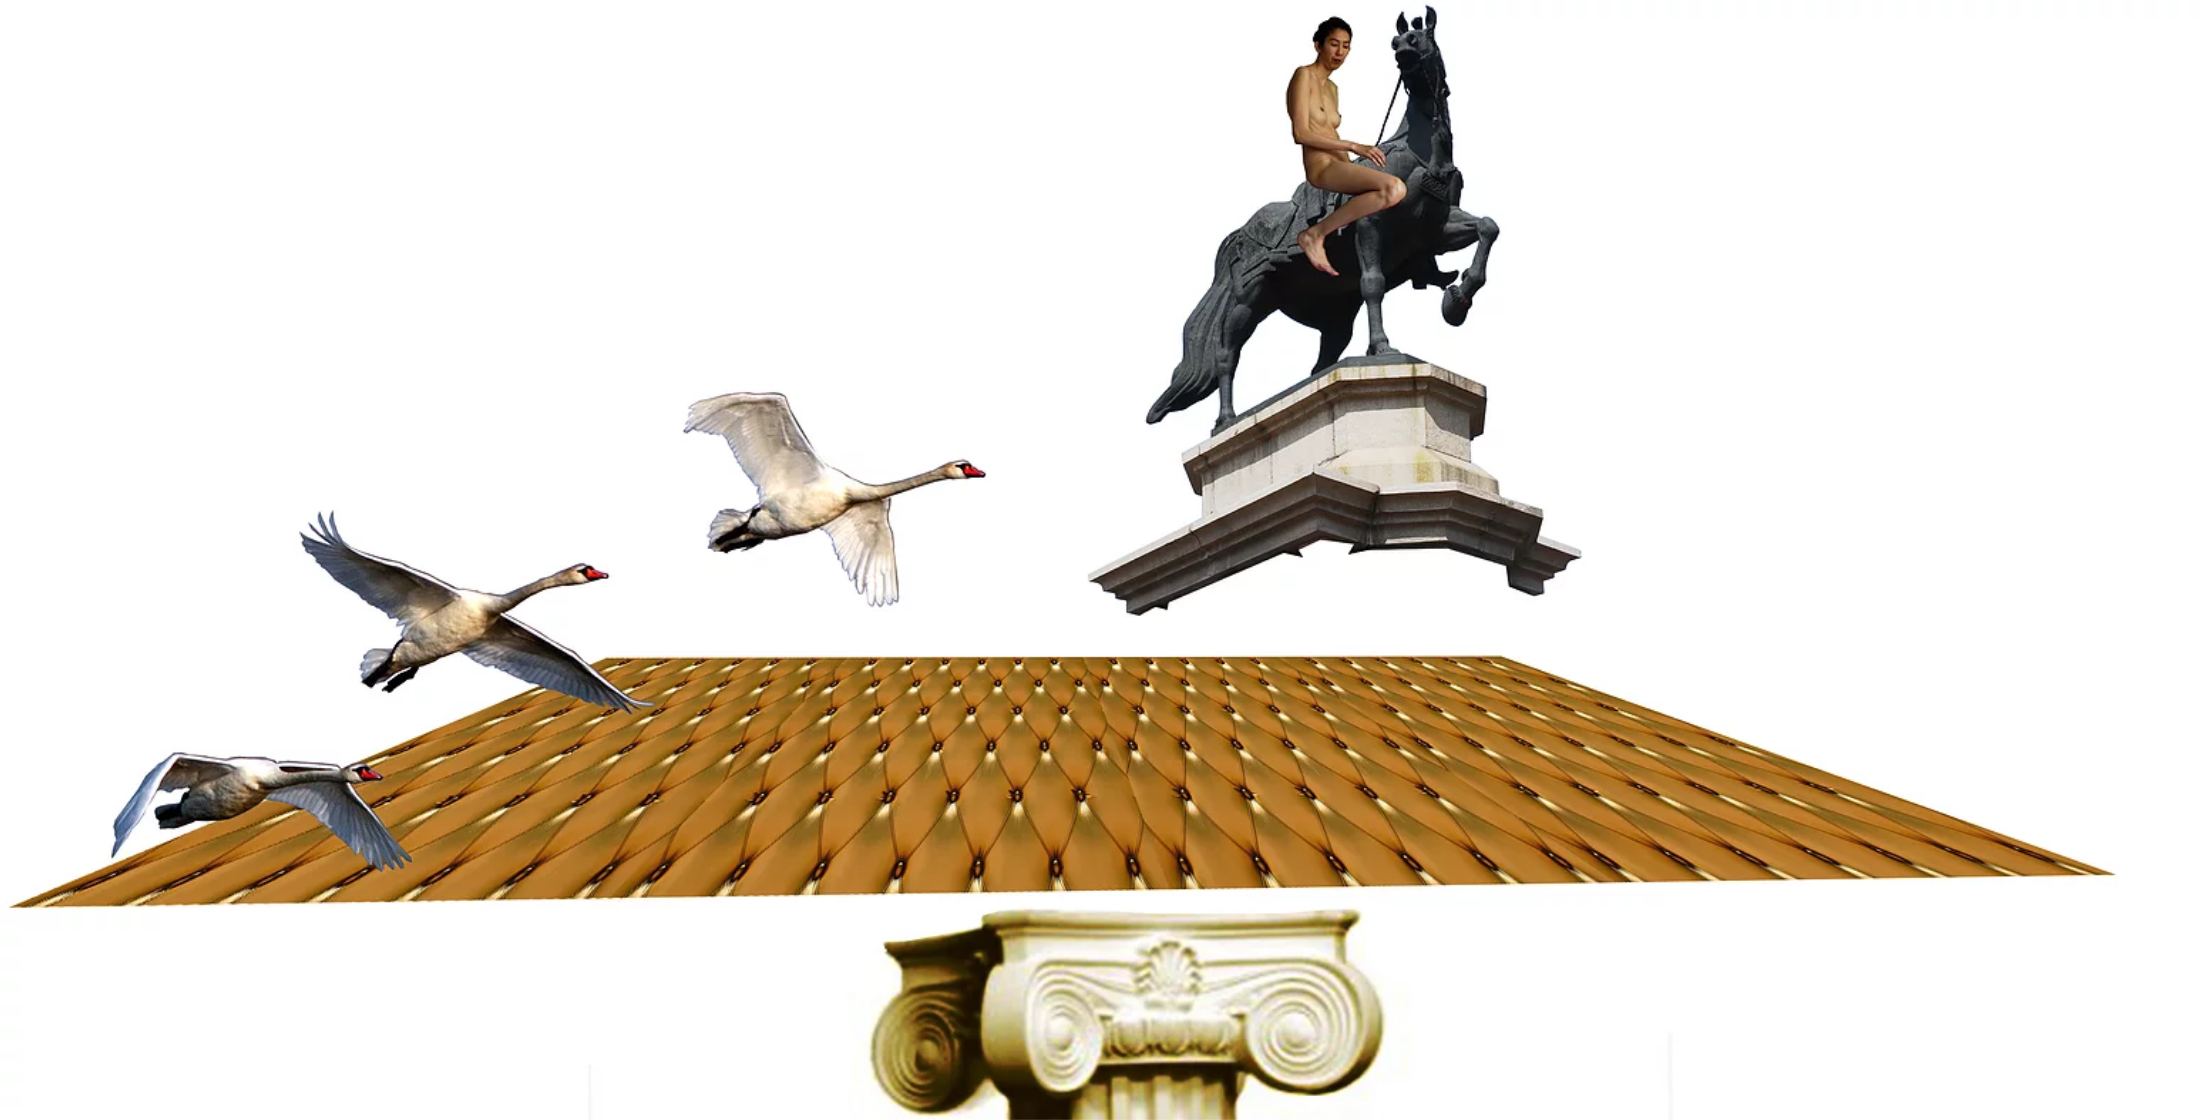 Artwork featuring birds, a podium and a person riding a horse statue